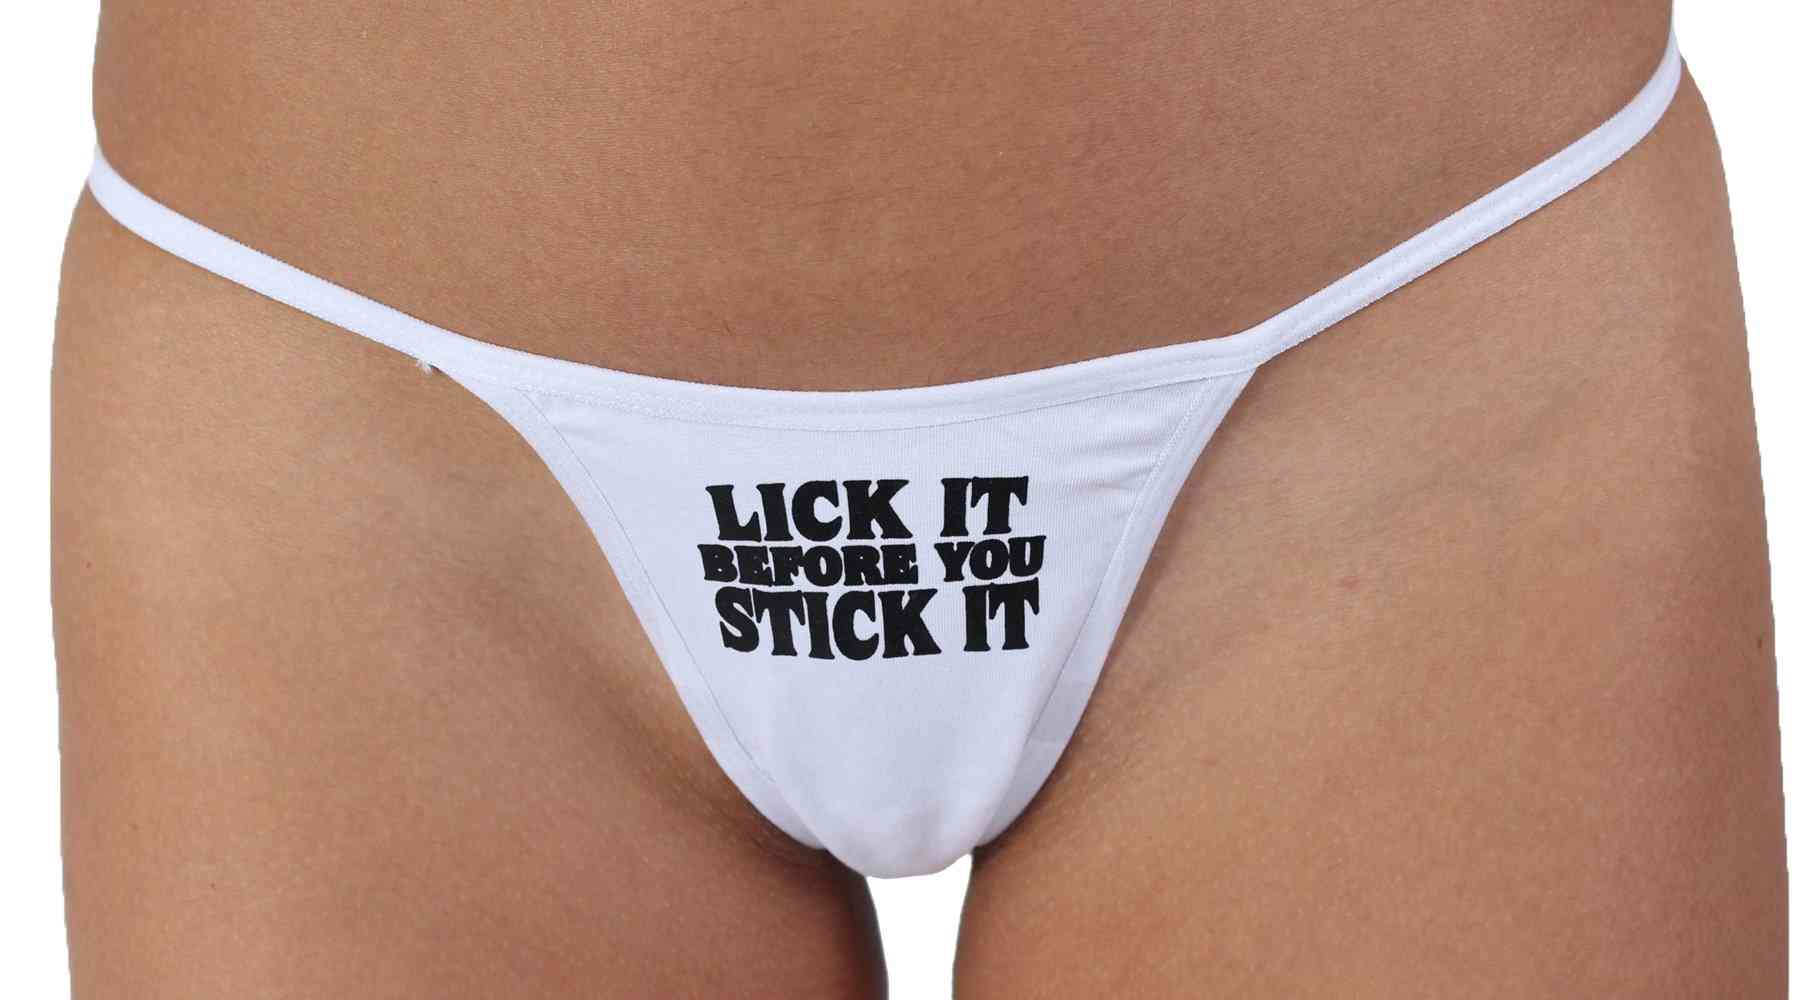 Lick It Before You Stick It-thong